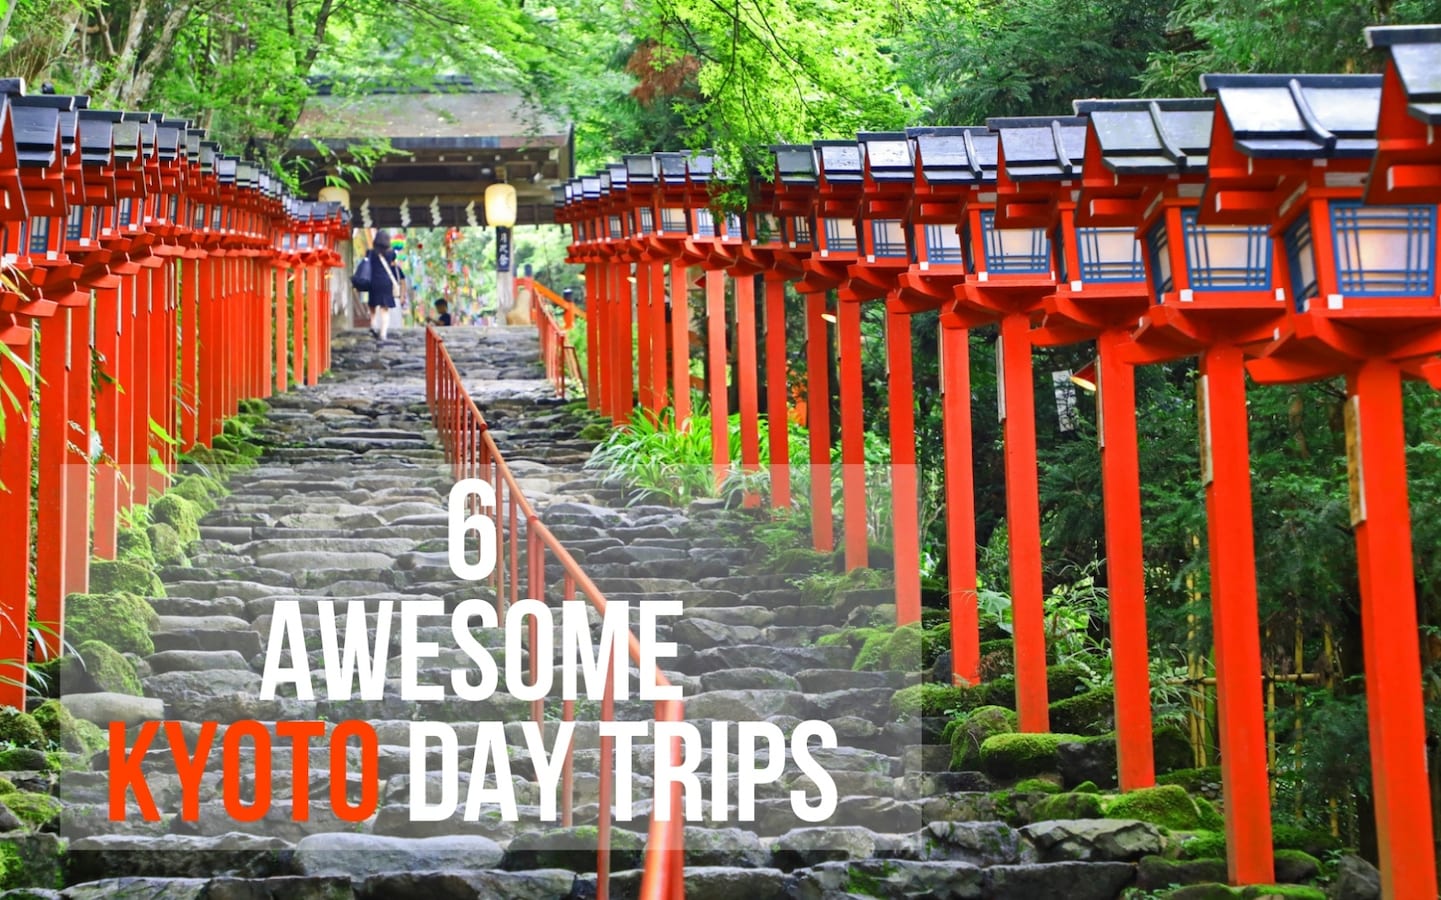 day trip to kyoto from tokyo reddit